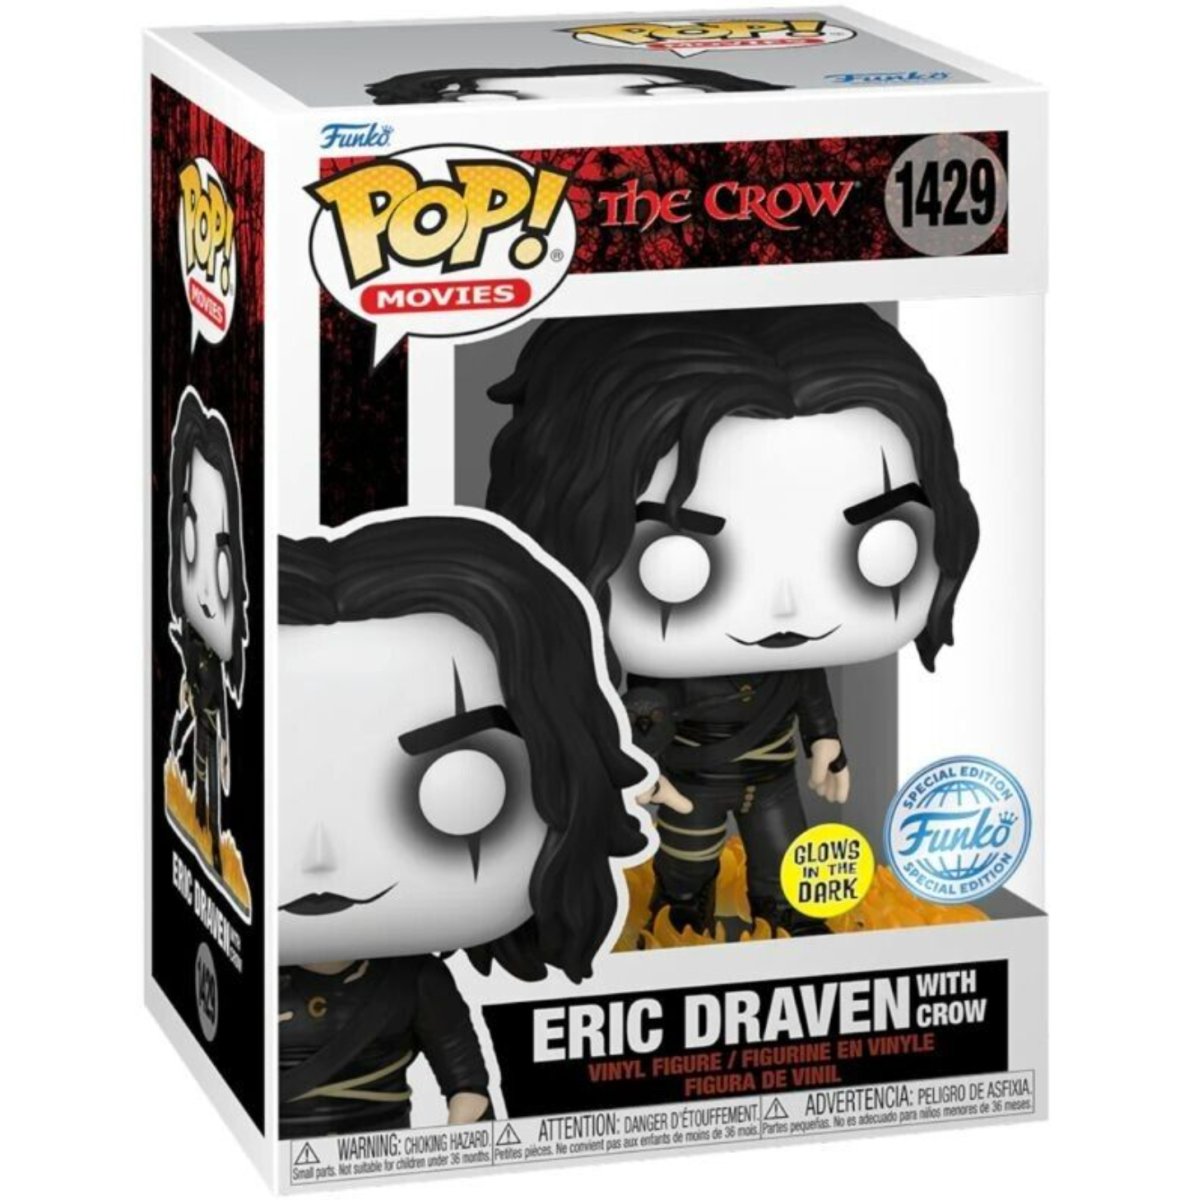 The Crow - Eric Draven with Crow [In Flames] (GITD Special Edition) #1429 - Funko Pop! Vinyl Movies - Persona Toys